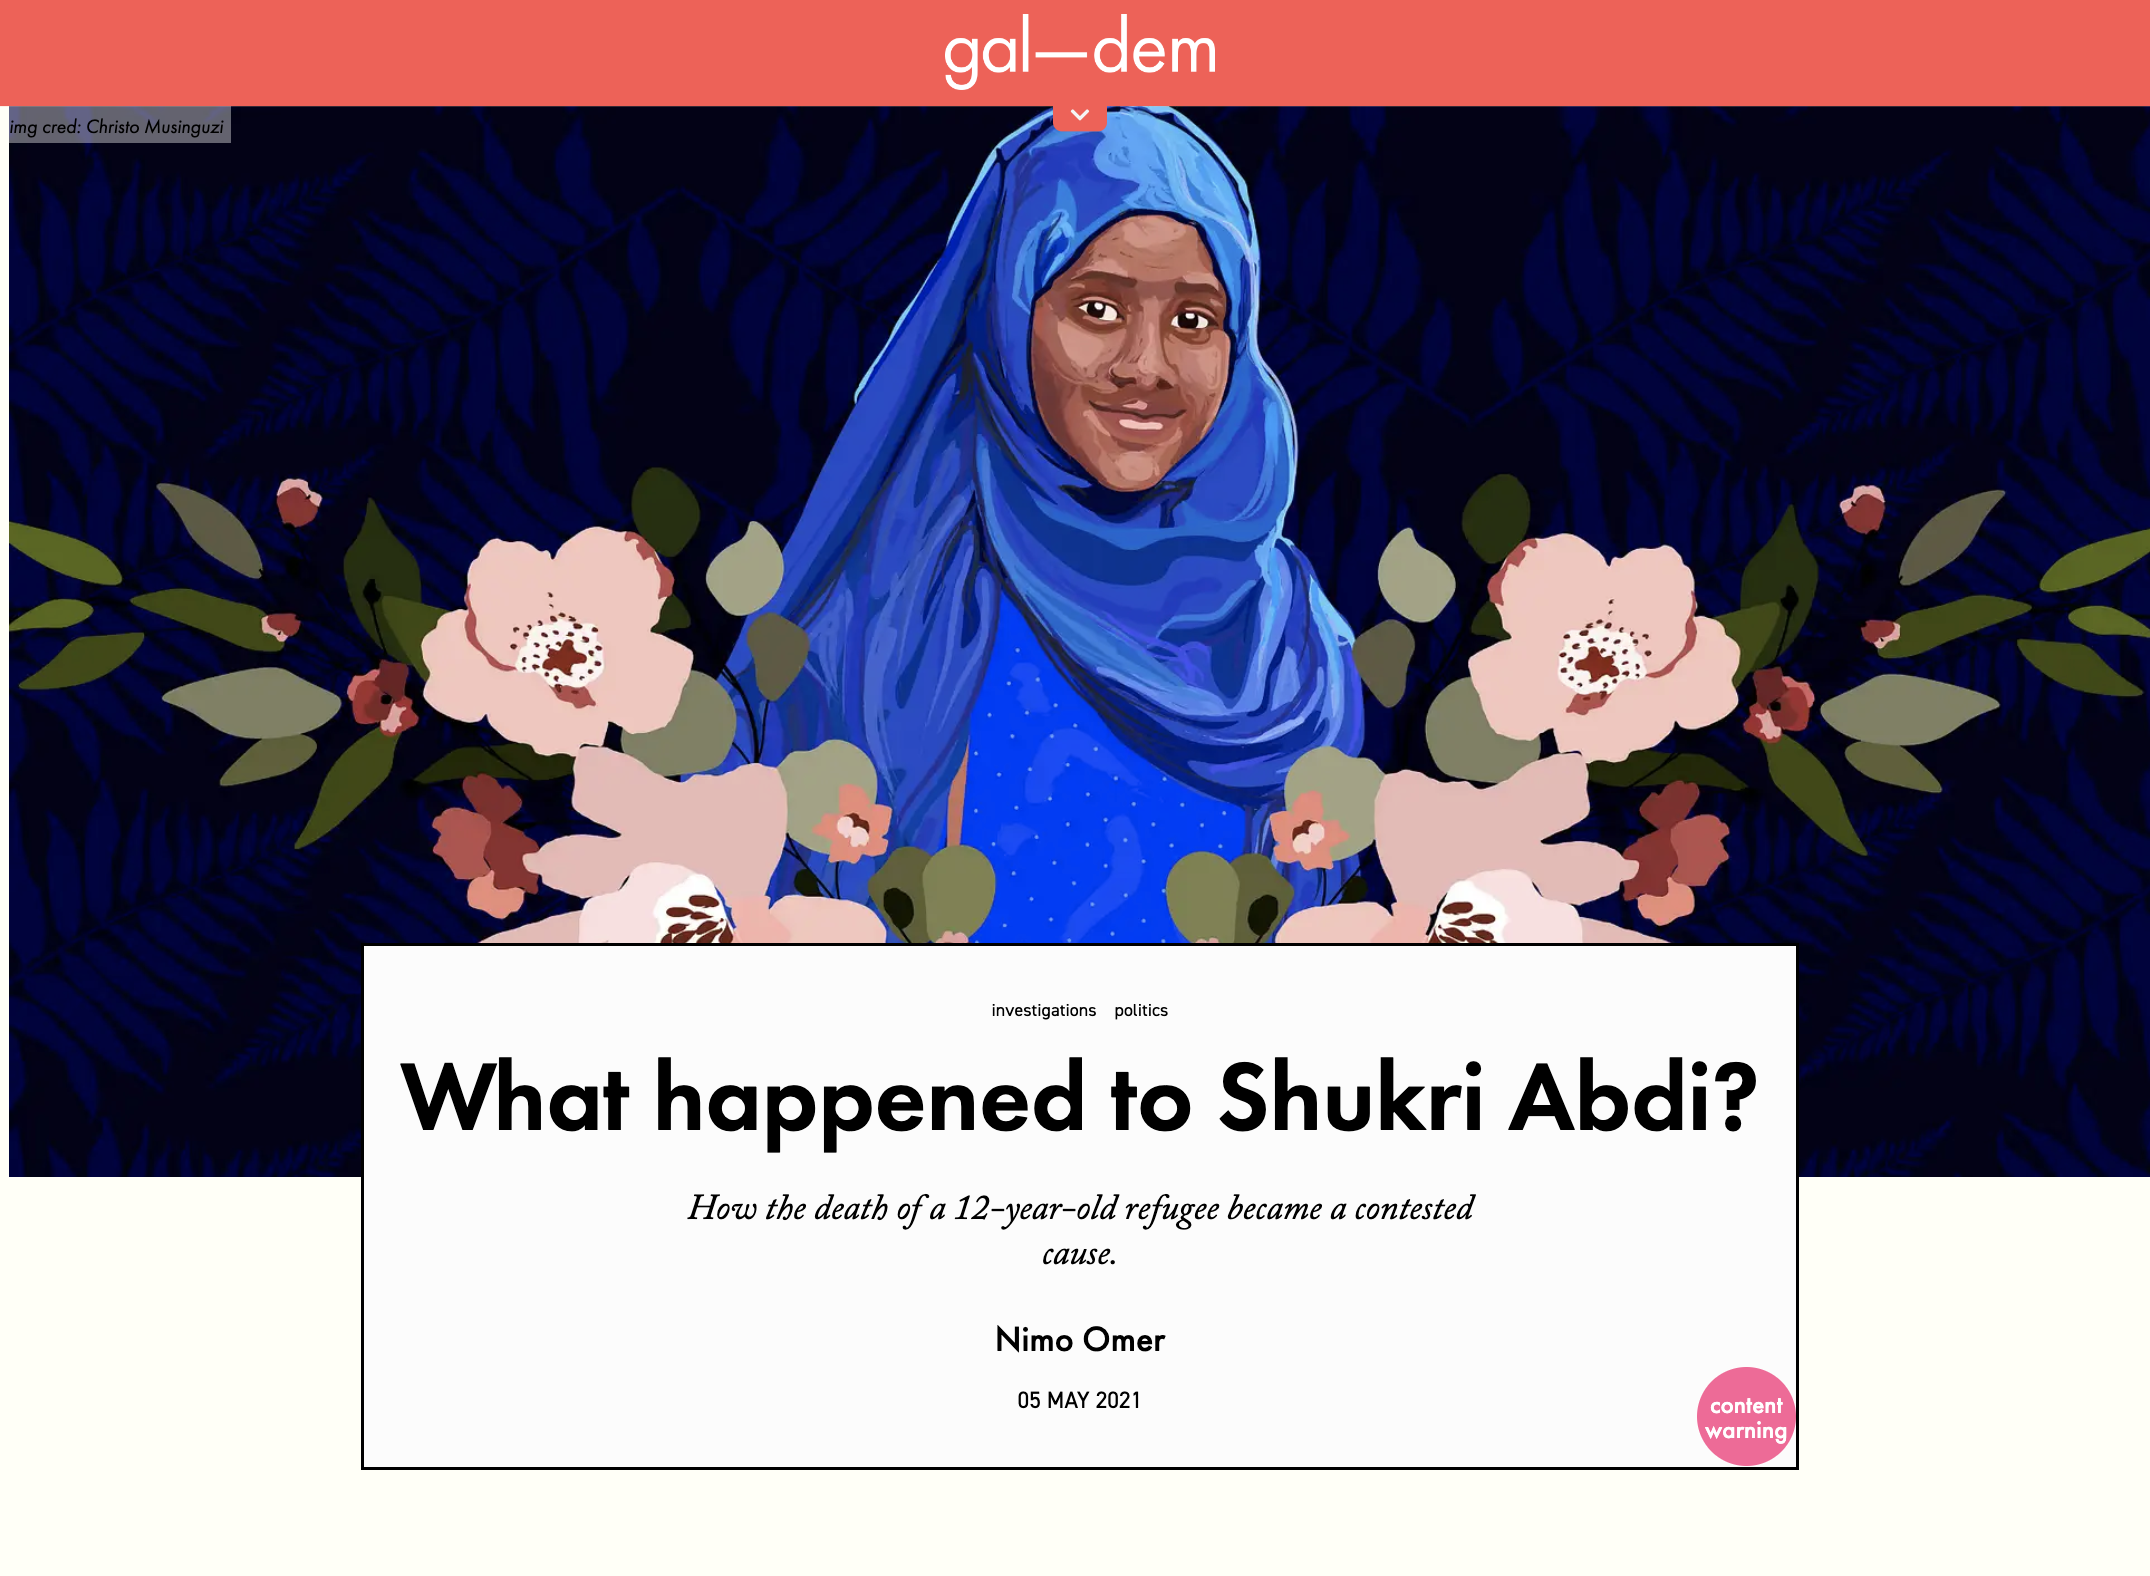 a screenshot of Nimo's story on gal-dem ' What happened to Shukri Abdi? content warning How the death of a 12-year-old refugee became a contested cause.'